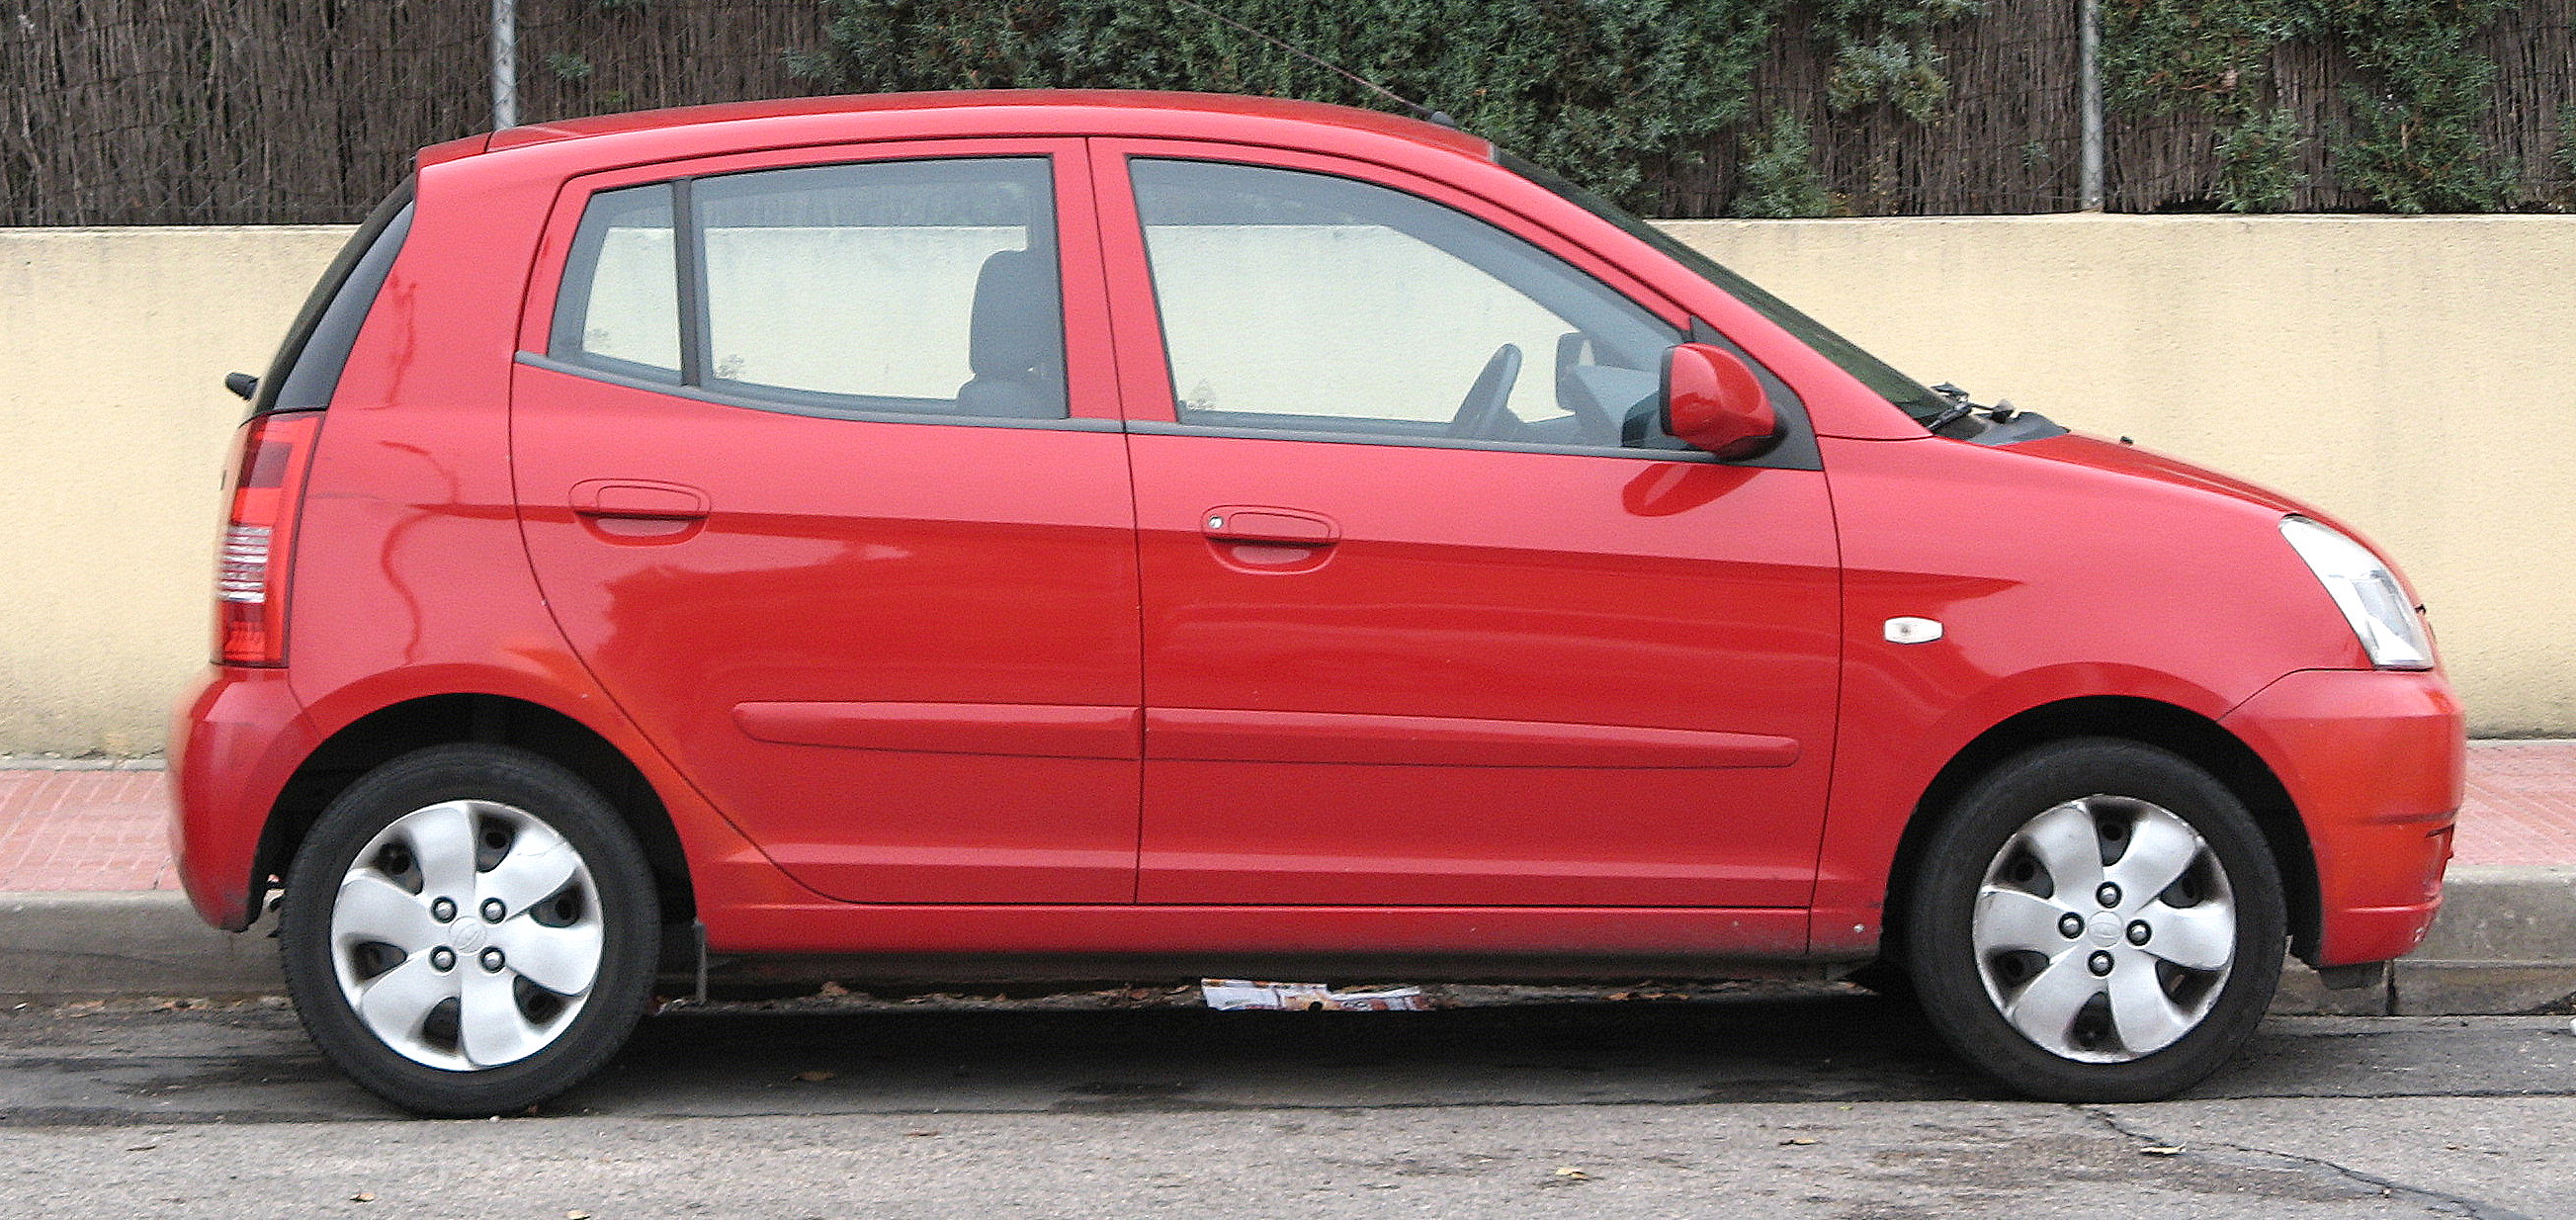 a small red hatchback car is parked by itself